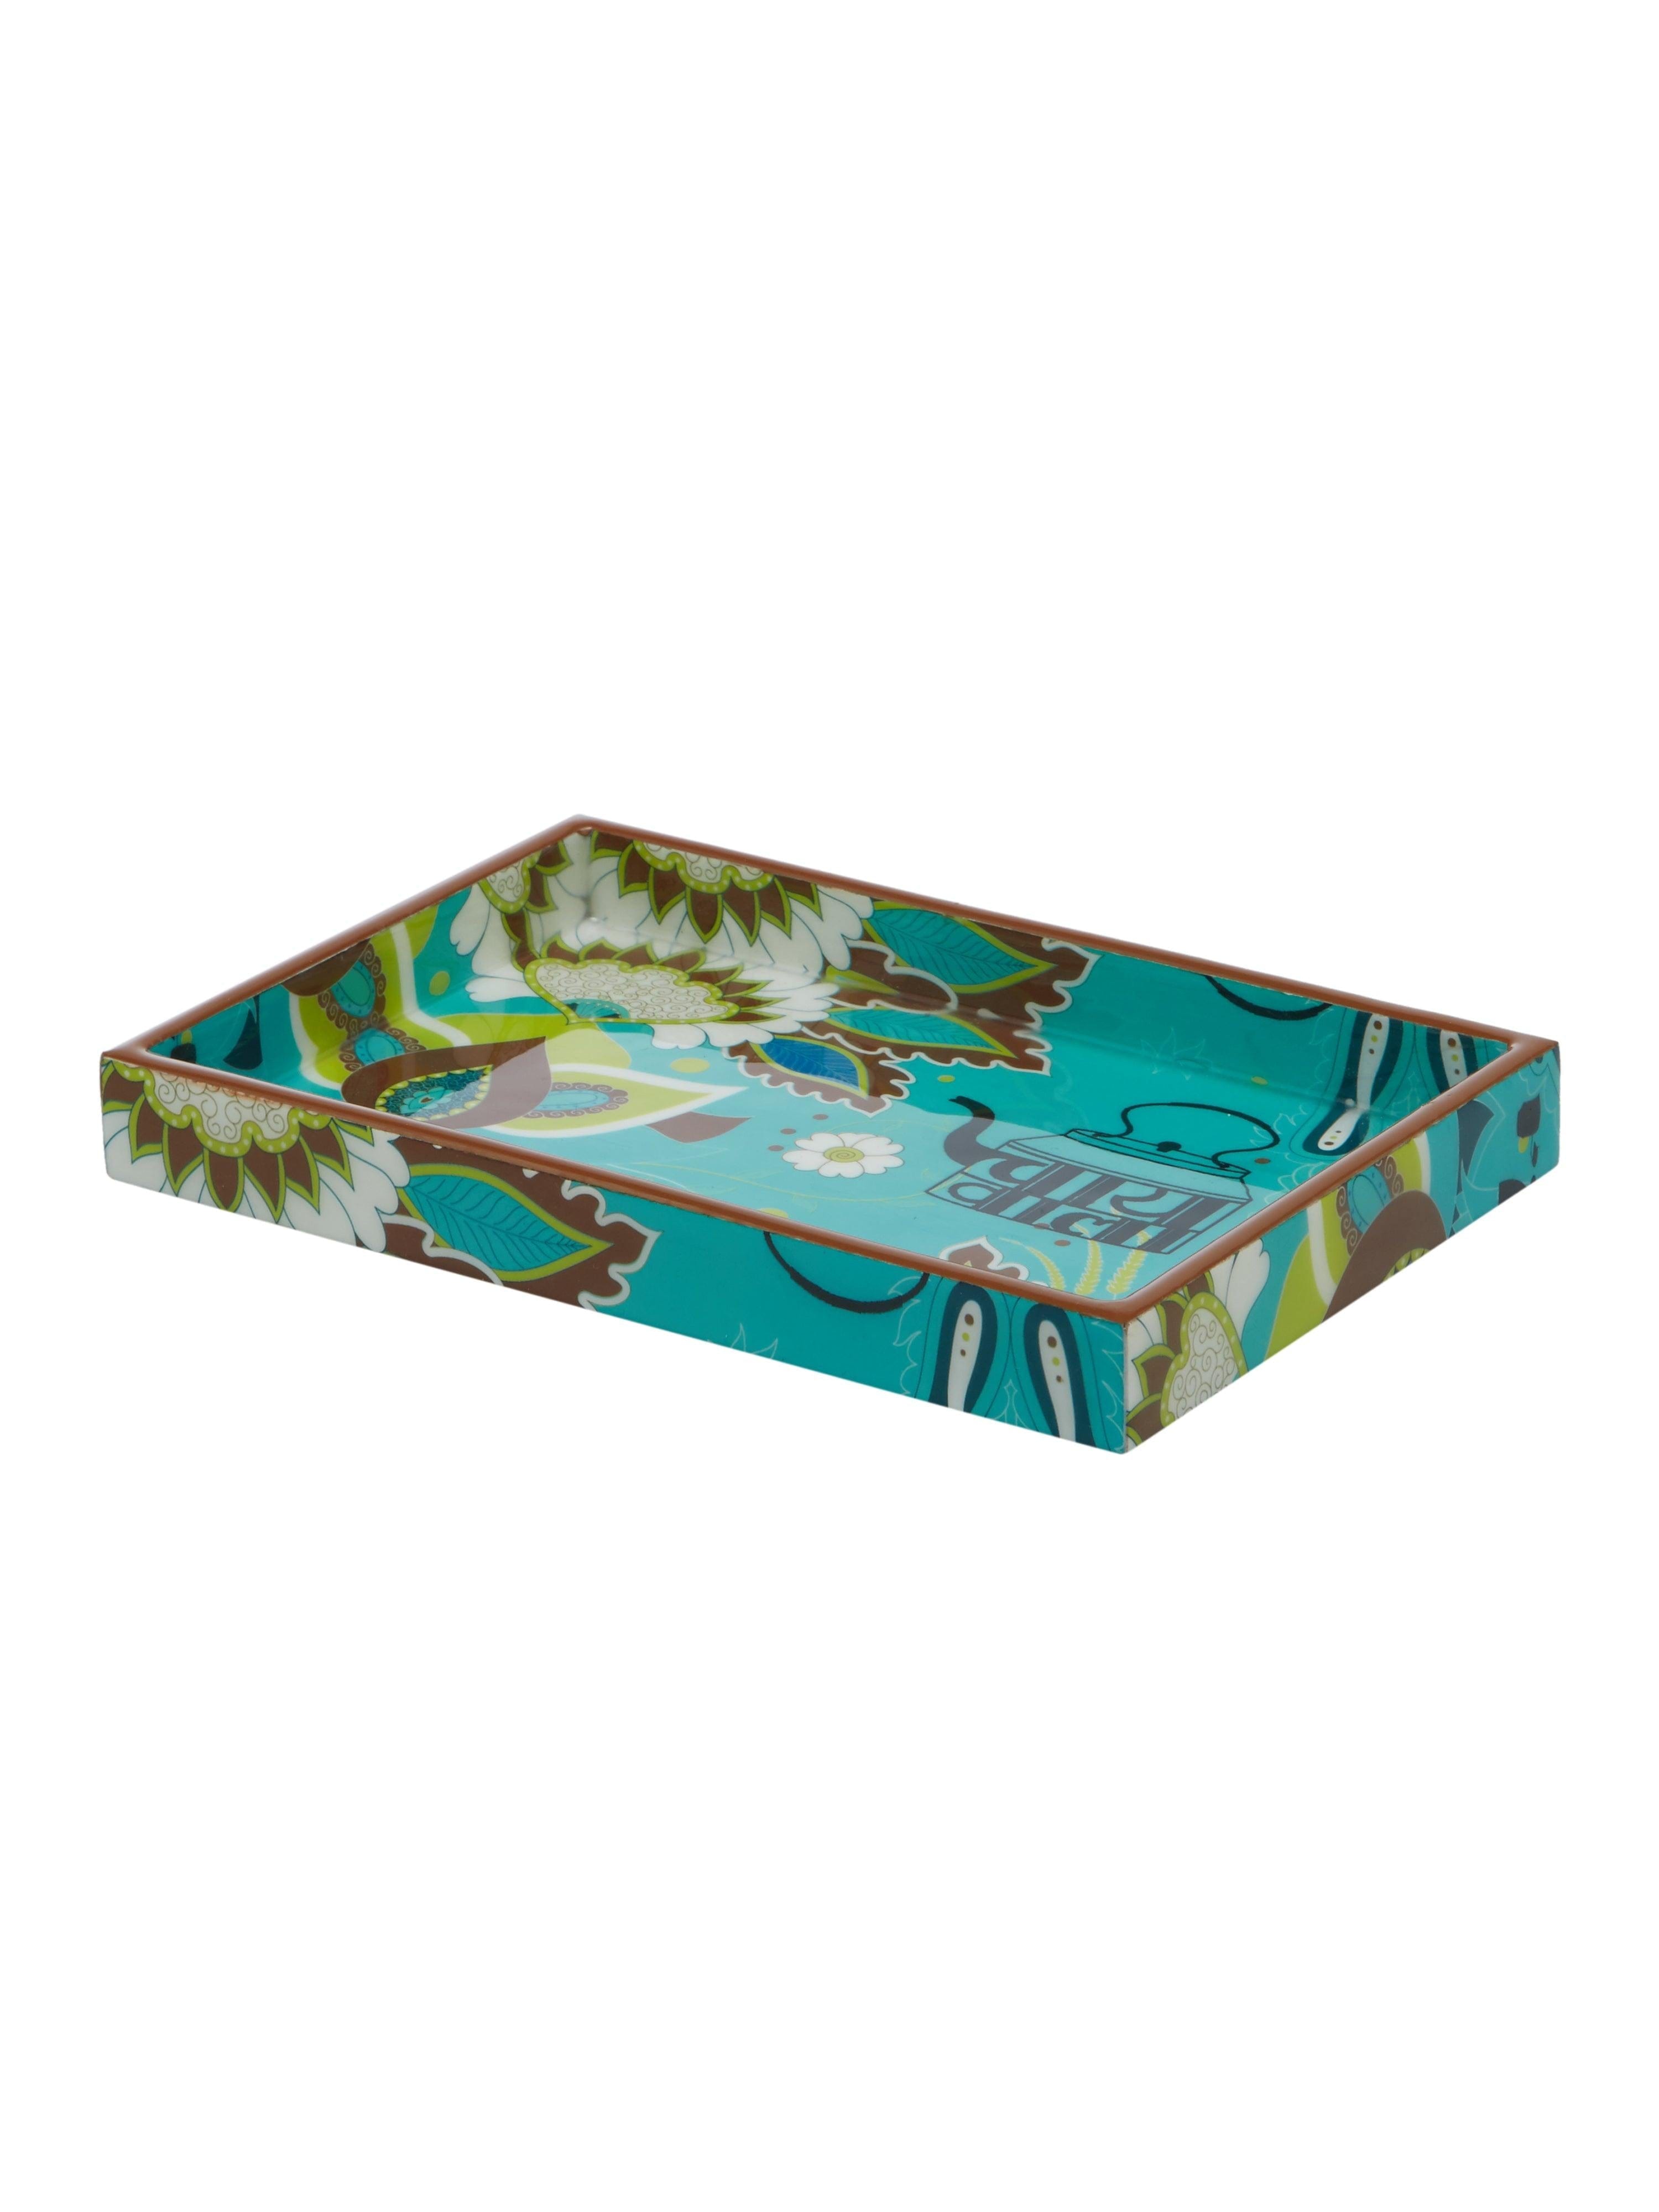 Chaiwala - 9 Inch Wooden Tray & 6 Wooden Coasters with Holder Set (Blue)